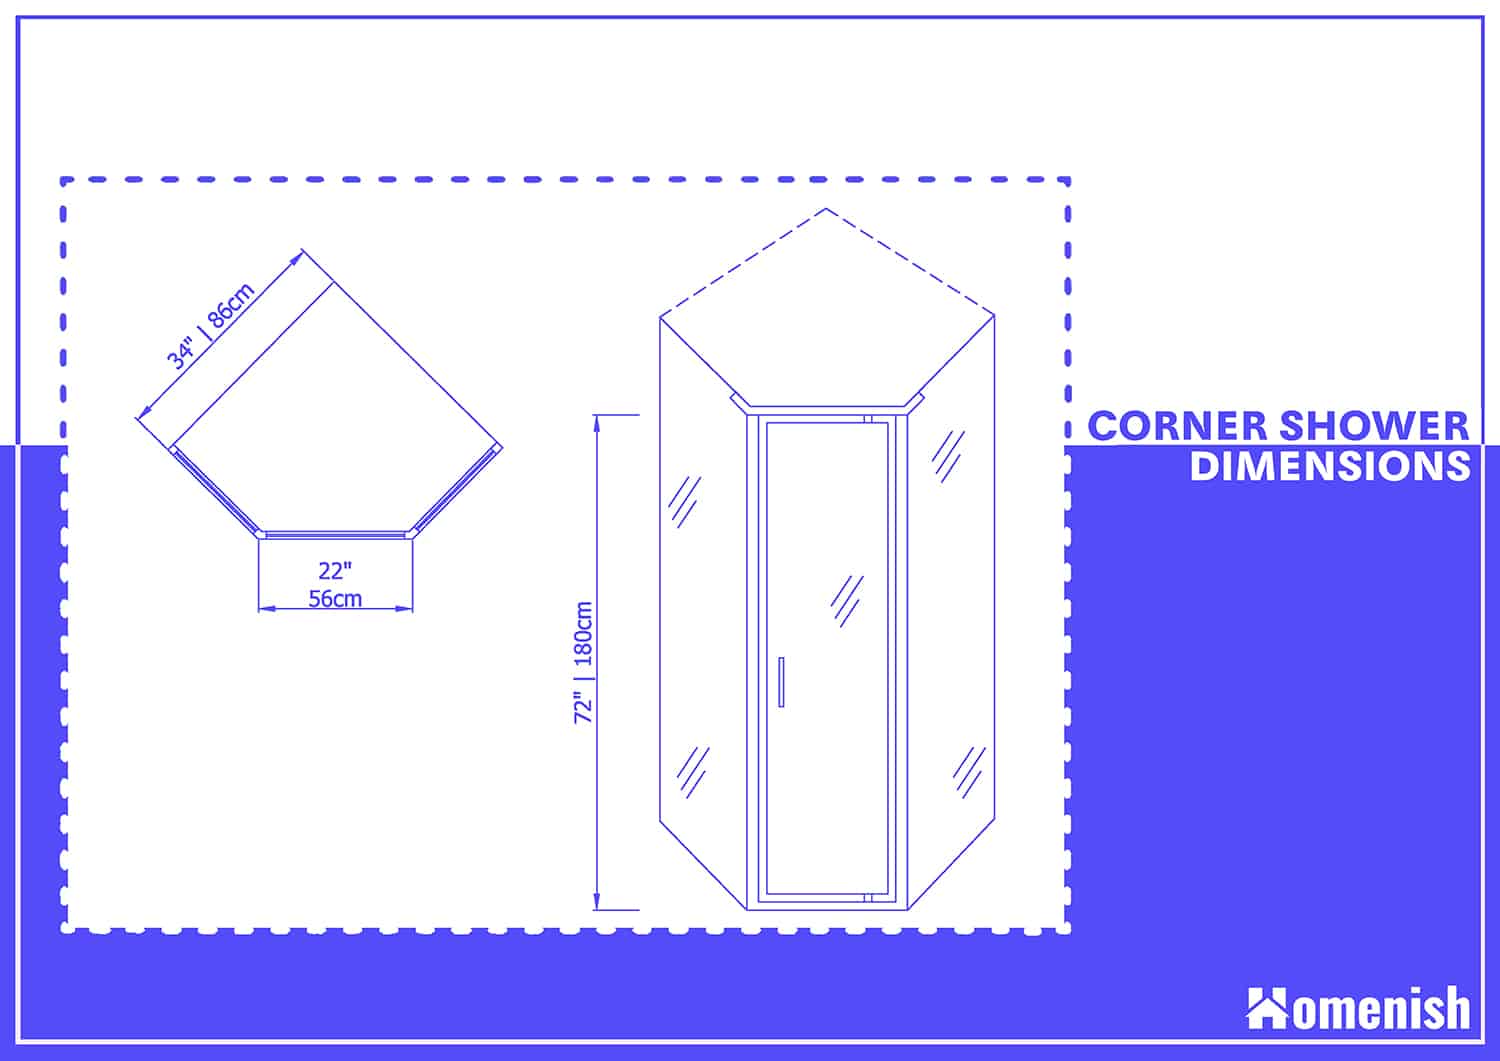 What Are The Corner Shower Dimensions Homenish